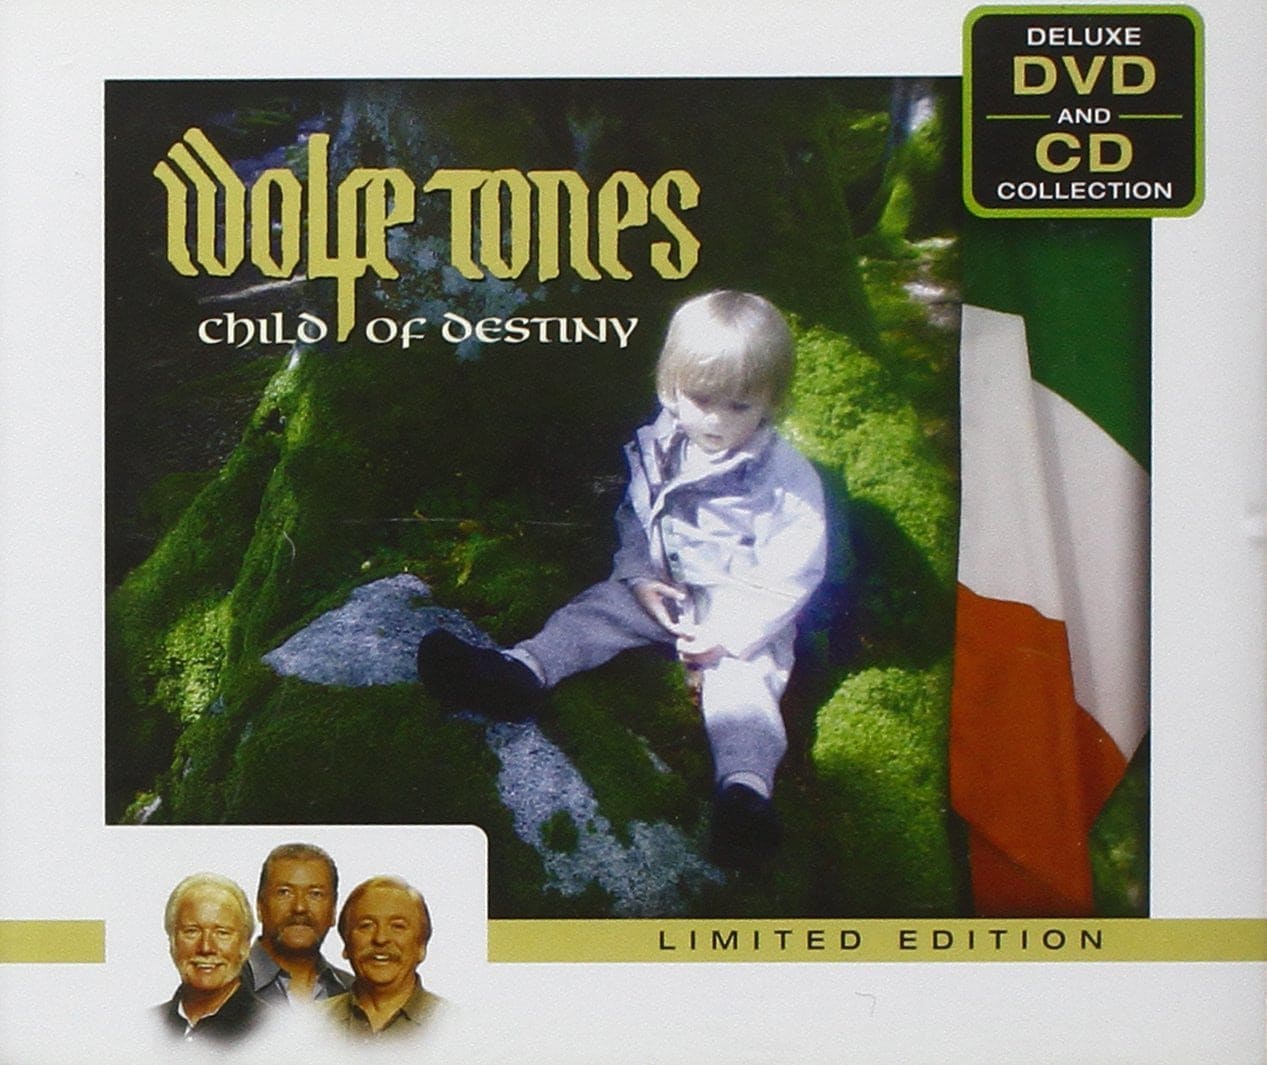 Child of Destiny (Limited Deluxe Edition) - The Wolfe Tones [CD + DVD]